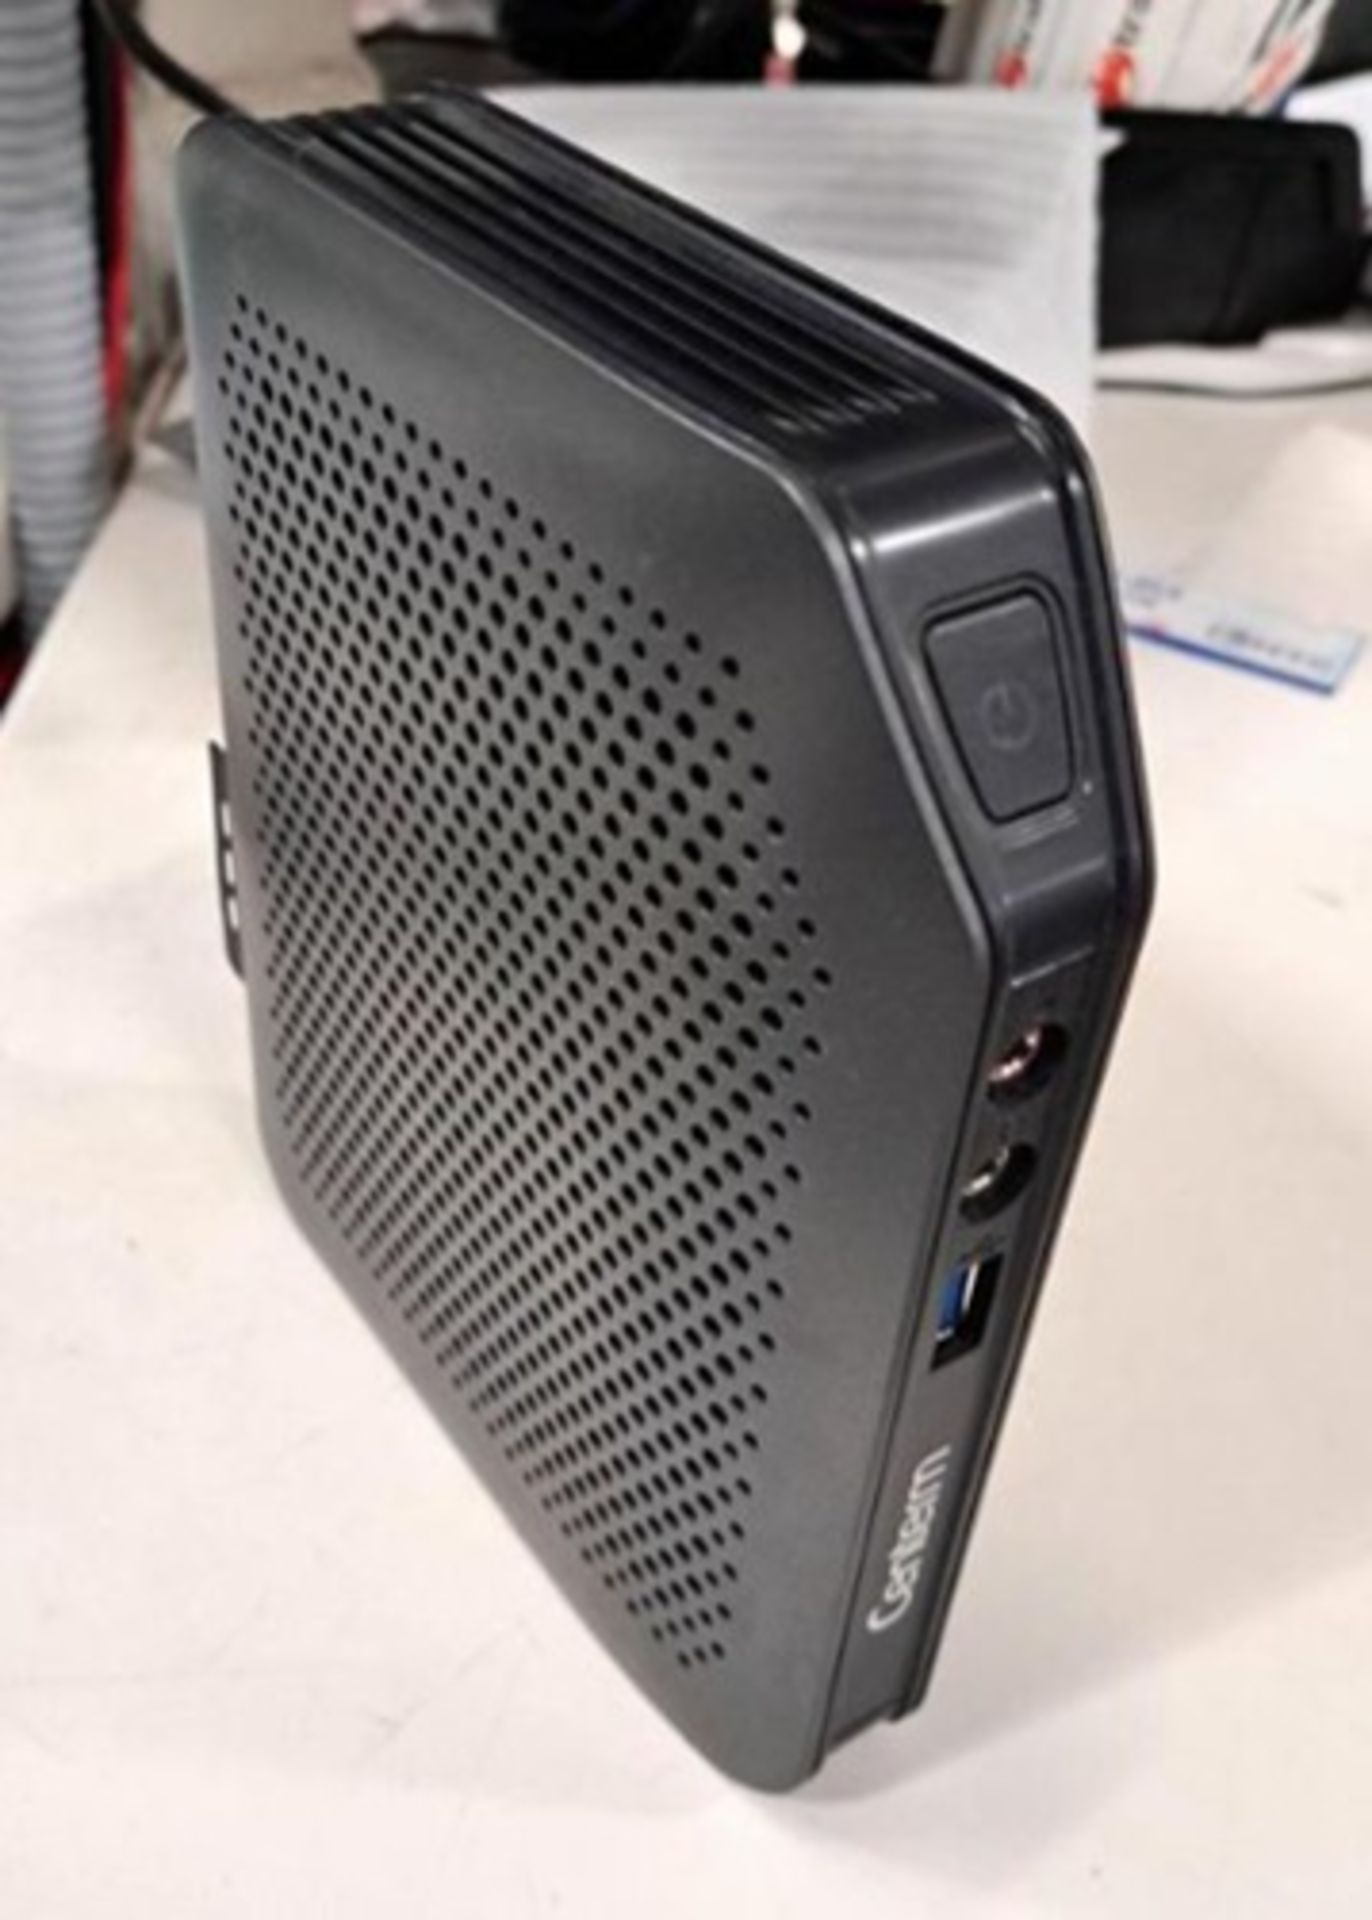 (New equipment) Lot of 2 Thin client containing: 1 Centerm Thin client, F310 Model, SN; Includes 22